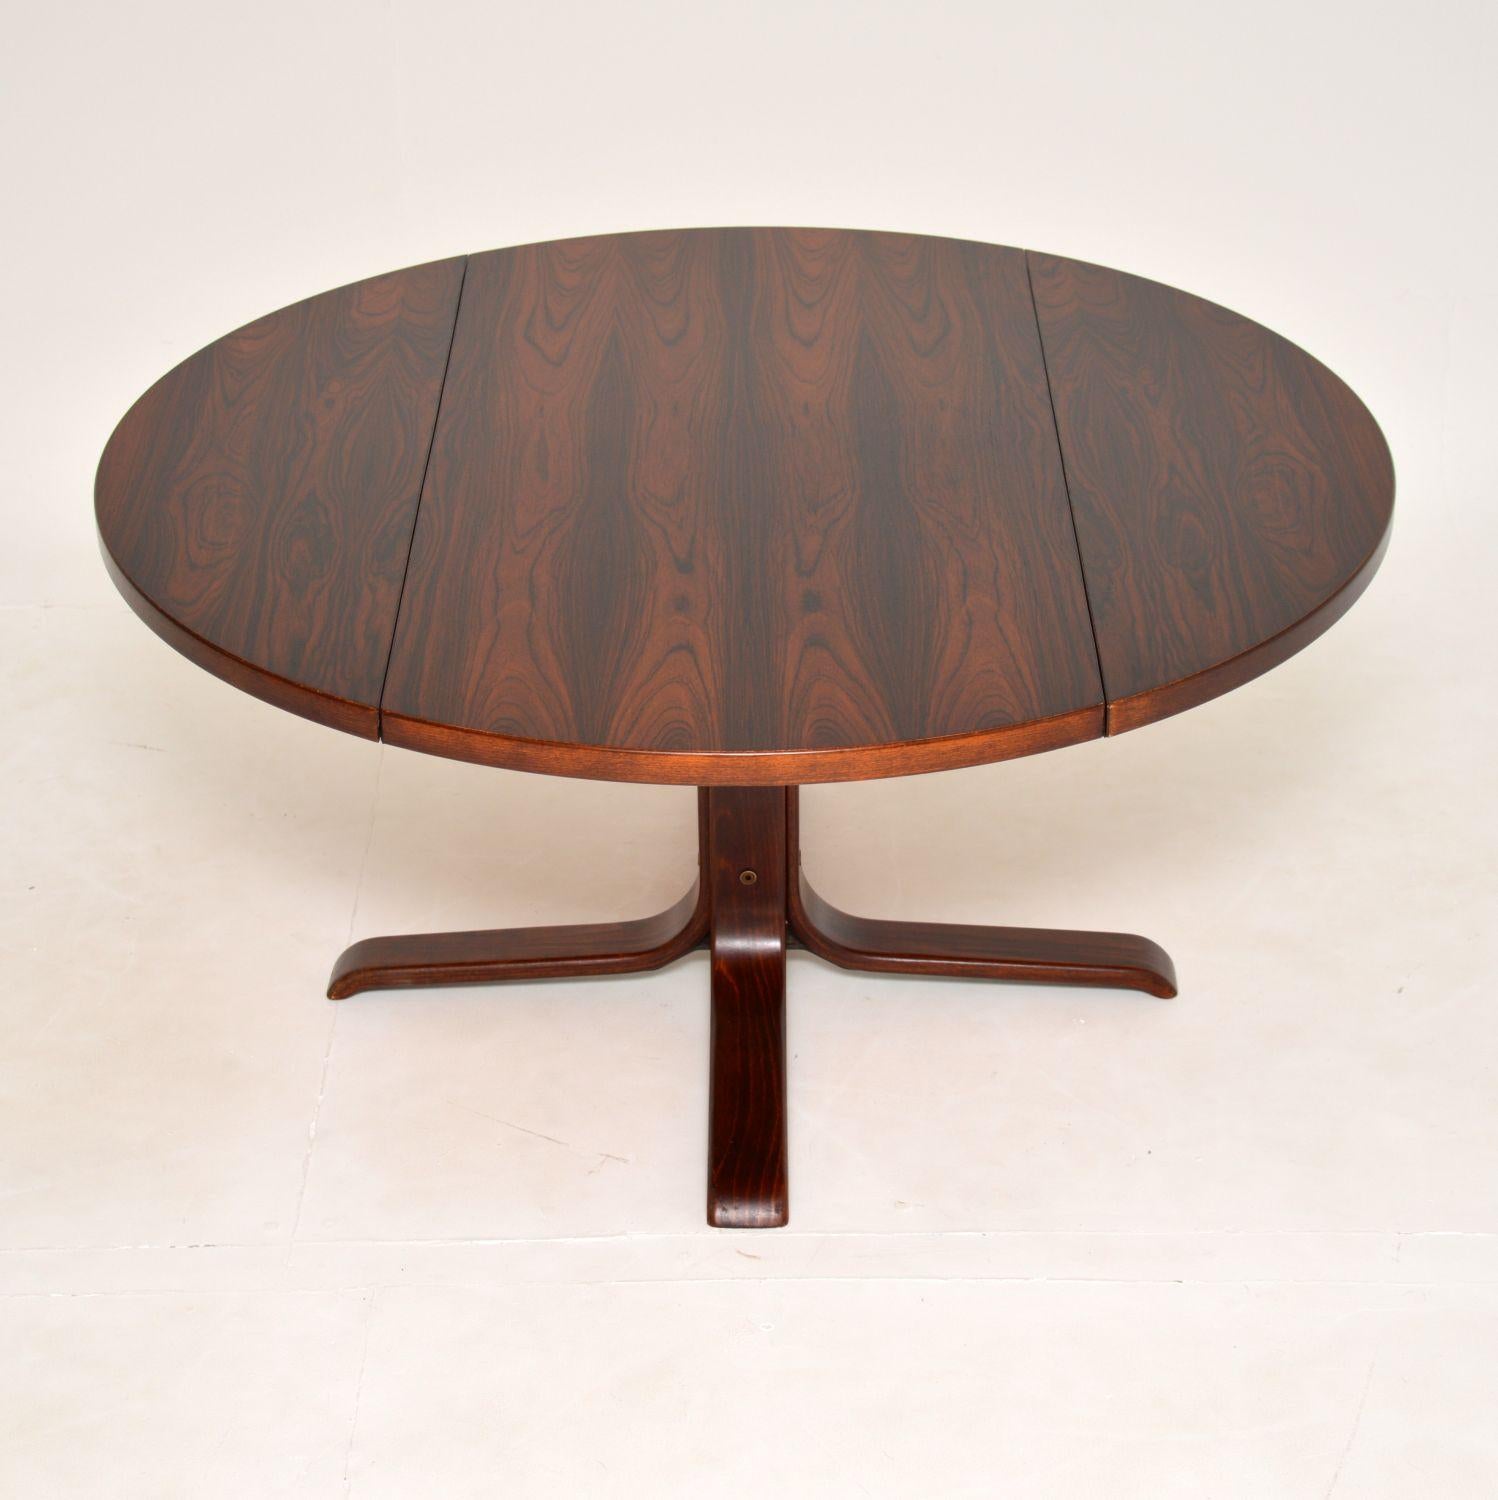 A stylish and very unusual Danish drop leaf coffee table in wood. This was made in Denmark, it dates from the 1970’s.

It is of superb quality and has a very large surface area for a coffee table. The two ends of the top can drop down to reduce